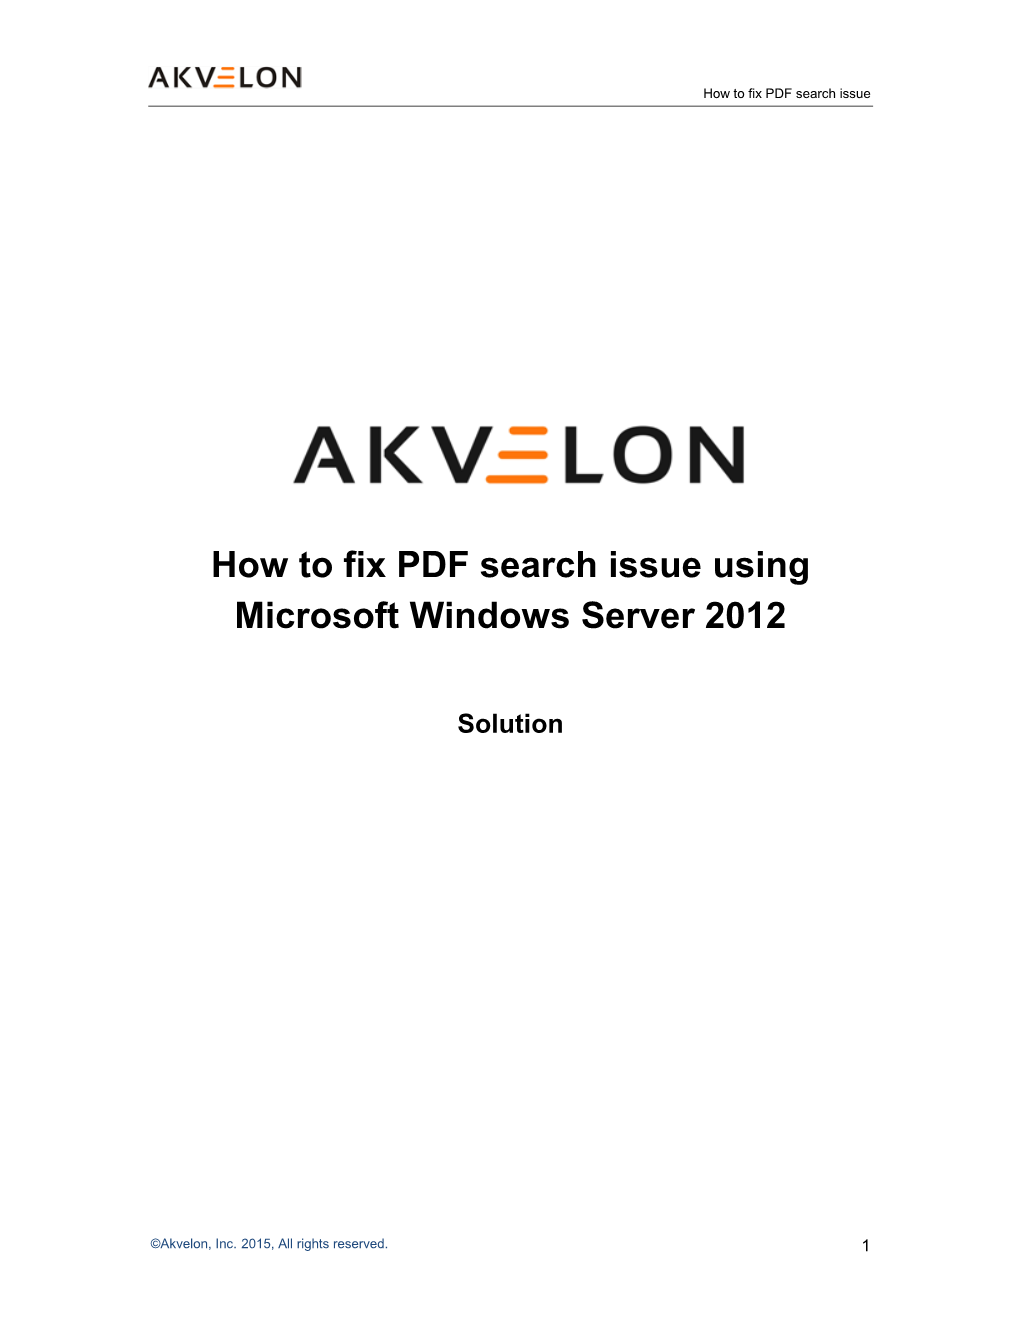 How to Fix PDF Search Issue Using Microsoft Windows Server 2012